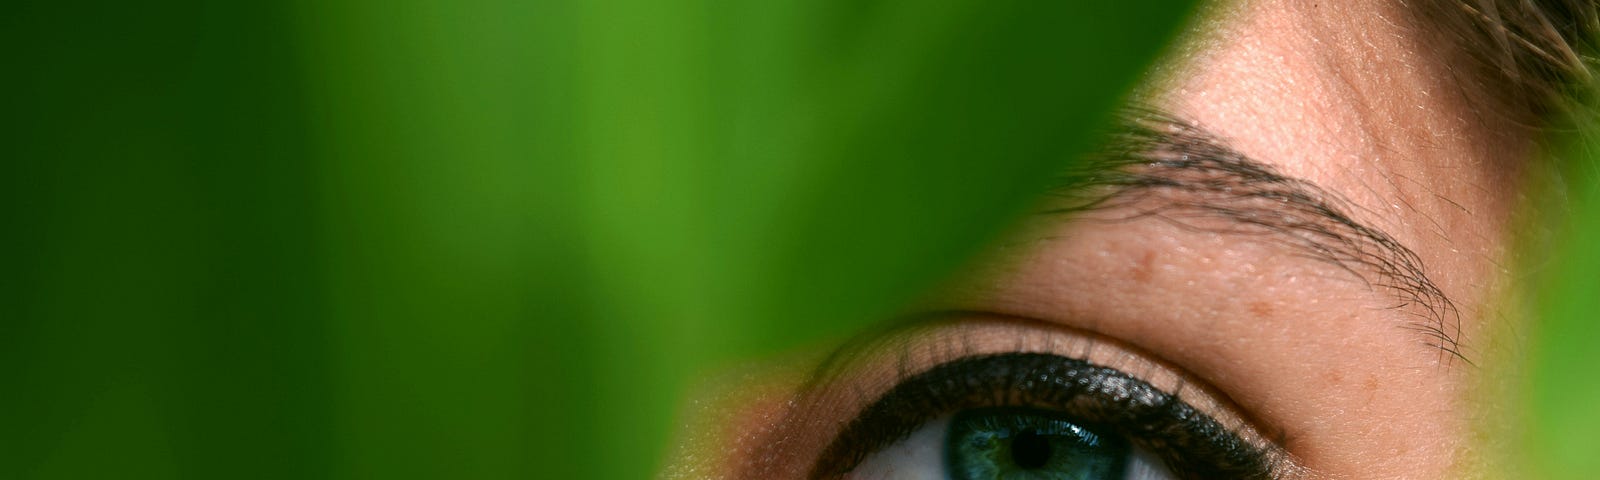 A left blue eye looking directly into the lens, while the right eye remains covered by a green leaf.